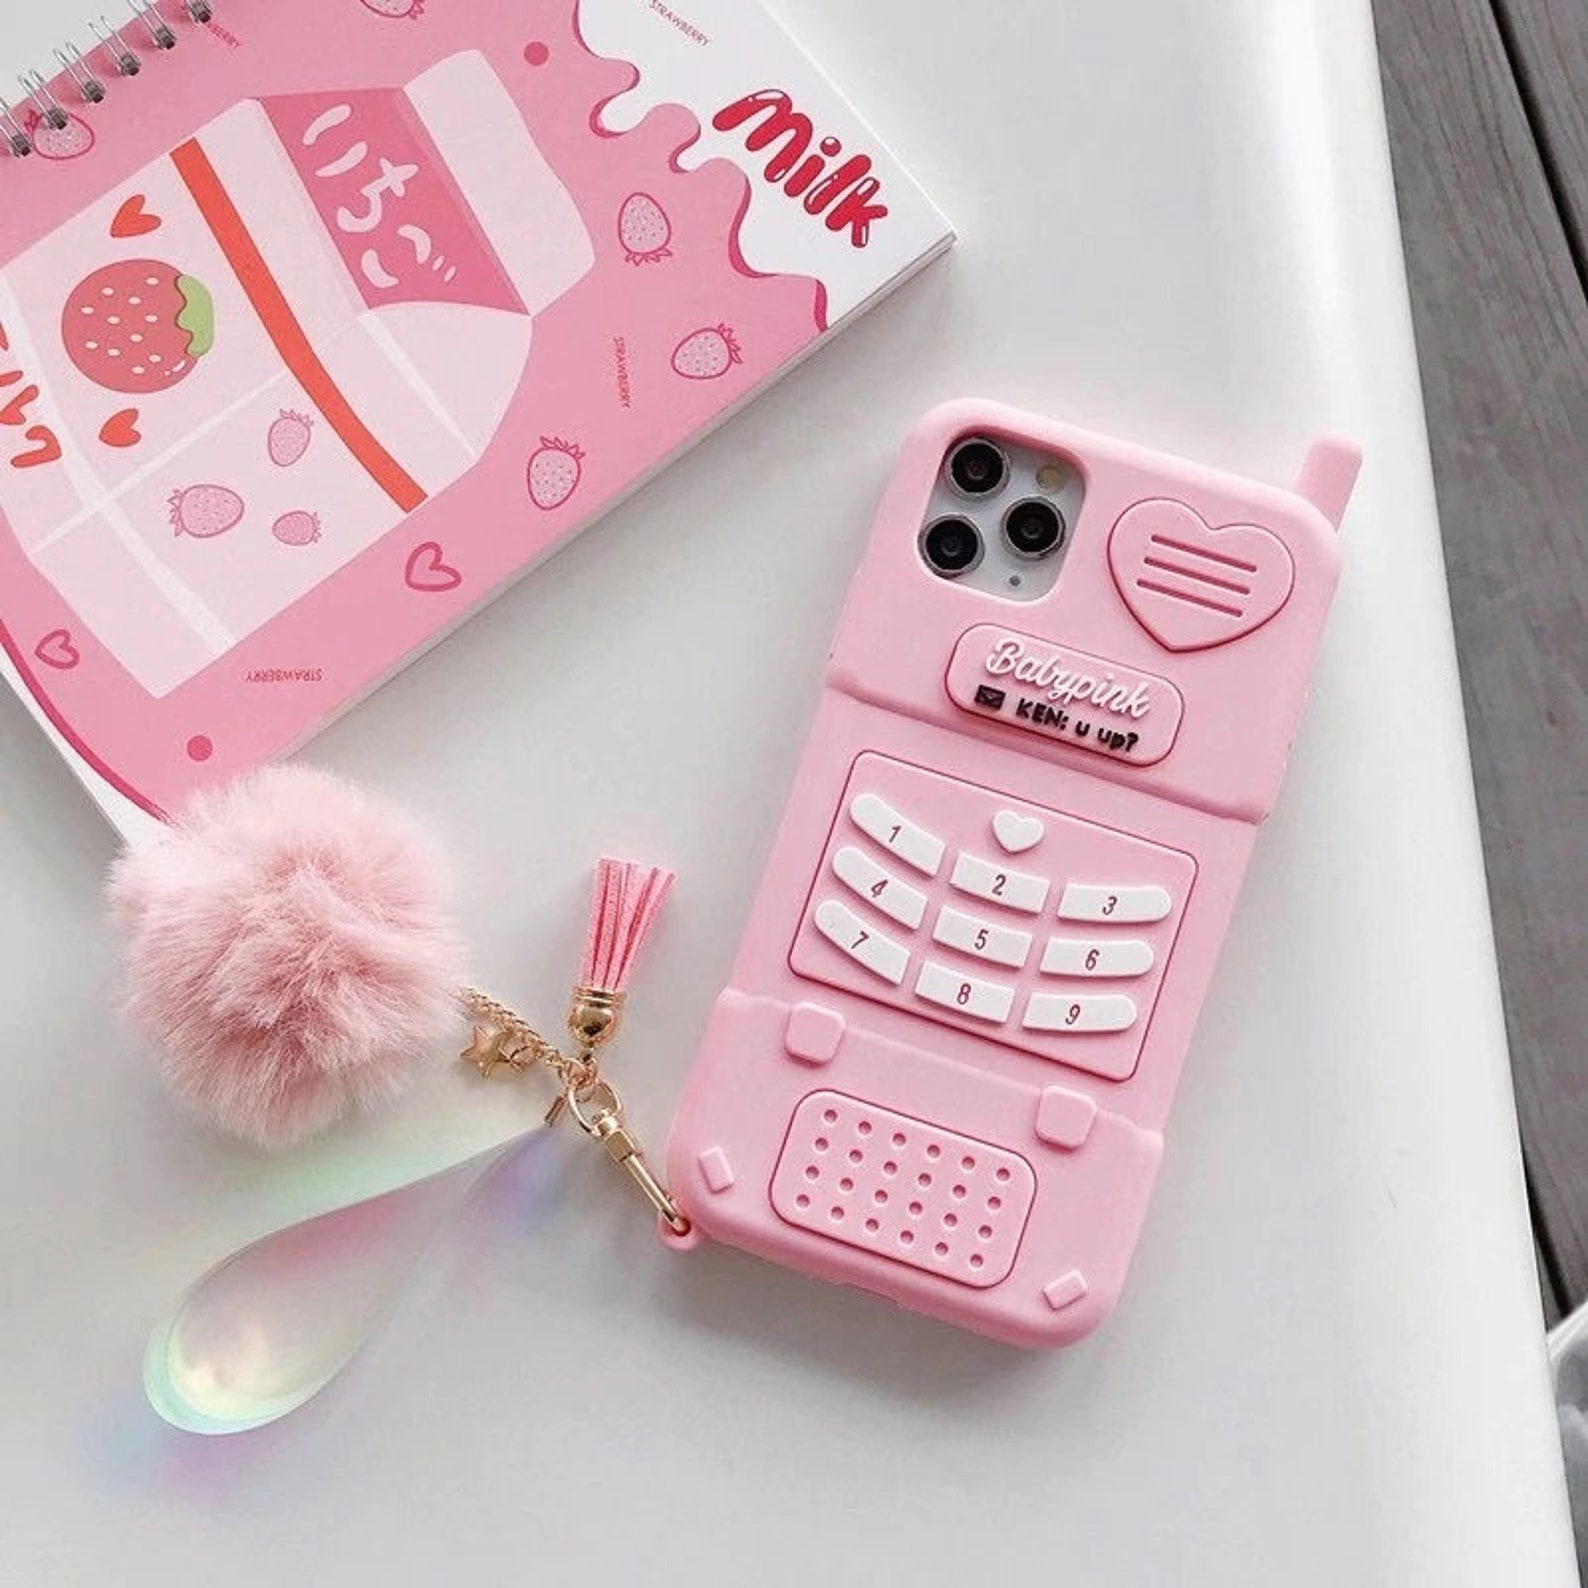 Cute Barbie Pink Phone case for iPhone 12 Pro Max iPhone 11 | Etsy